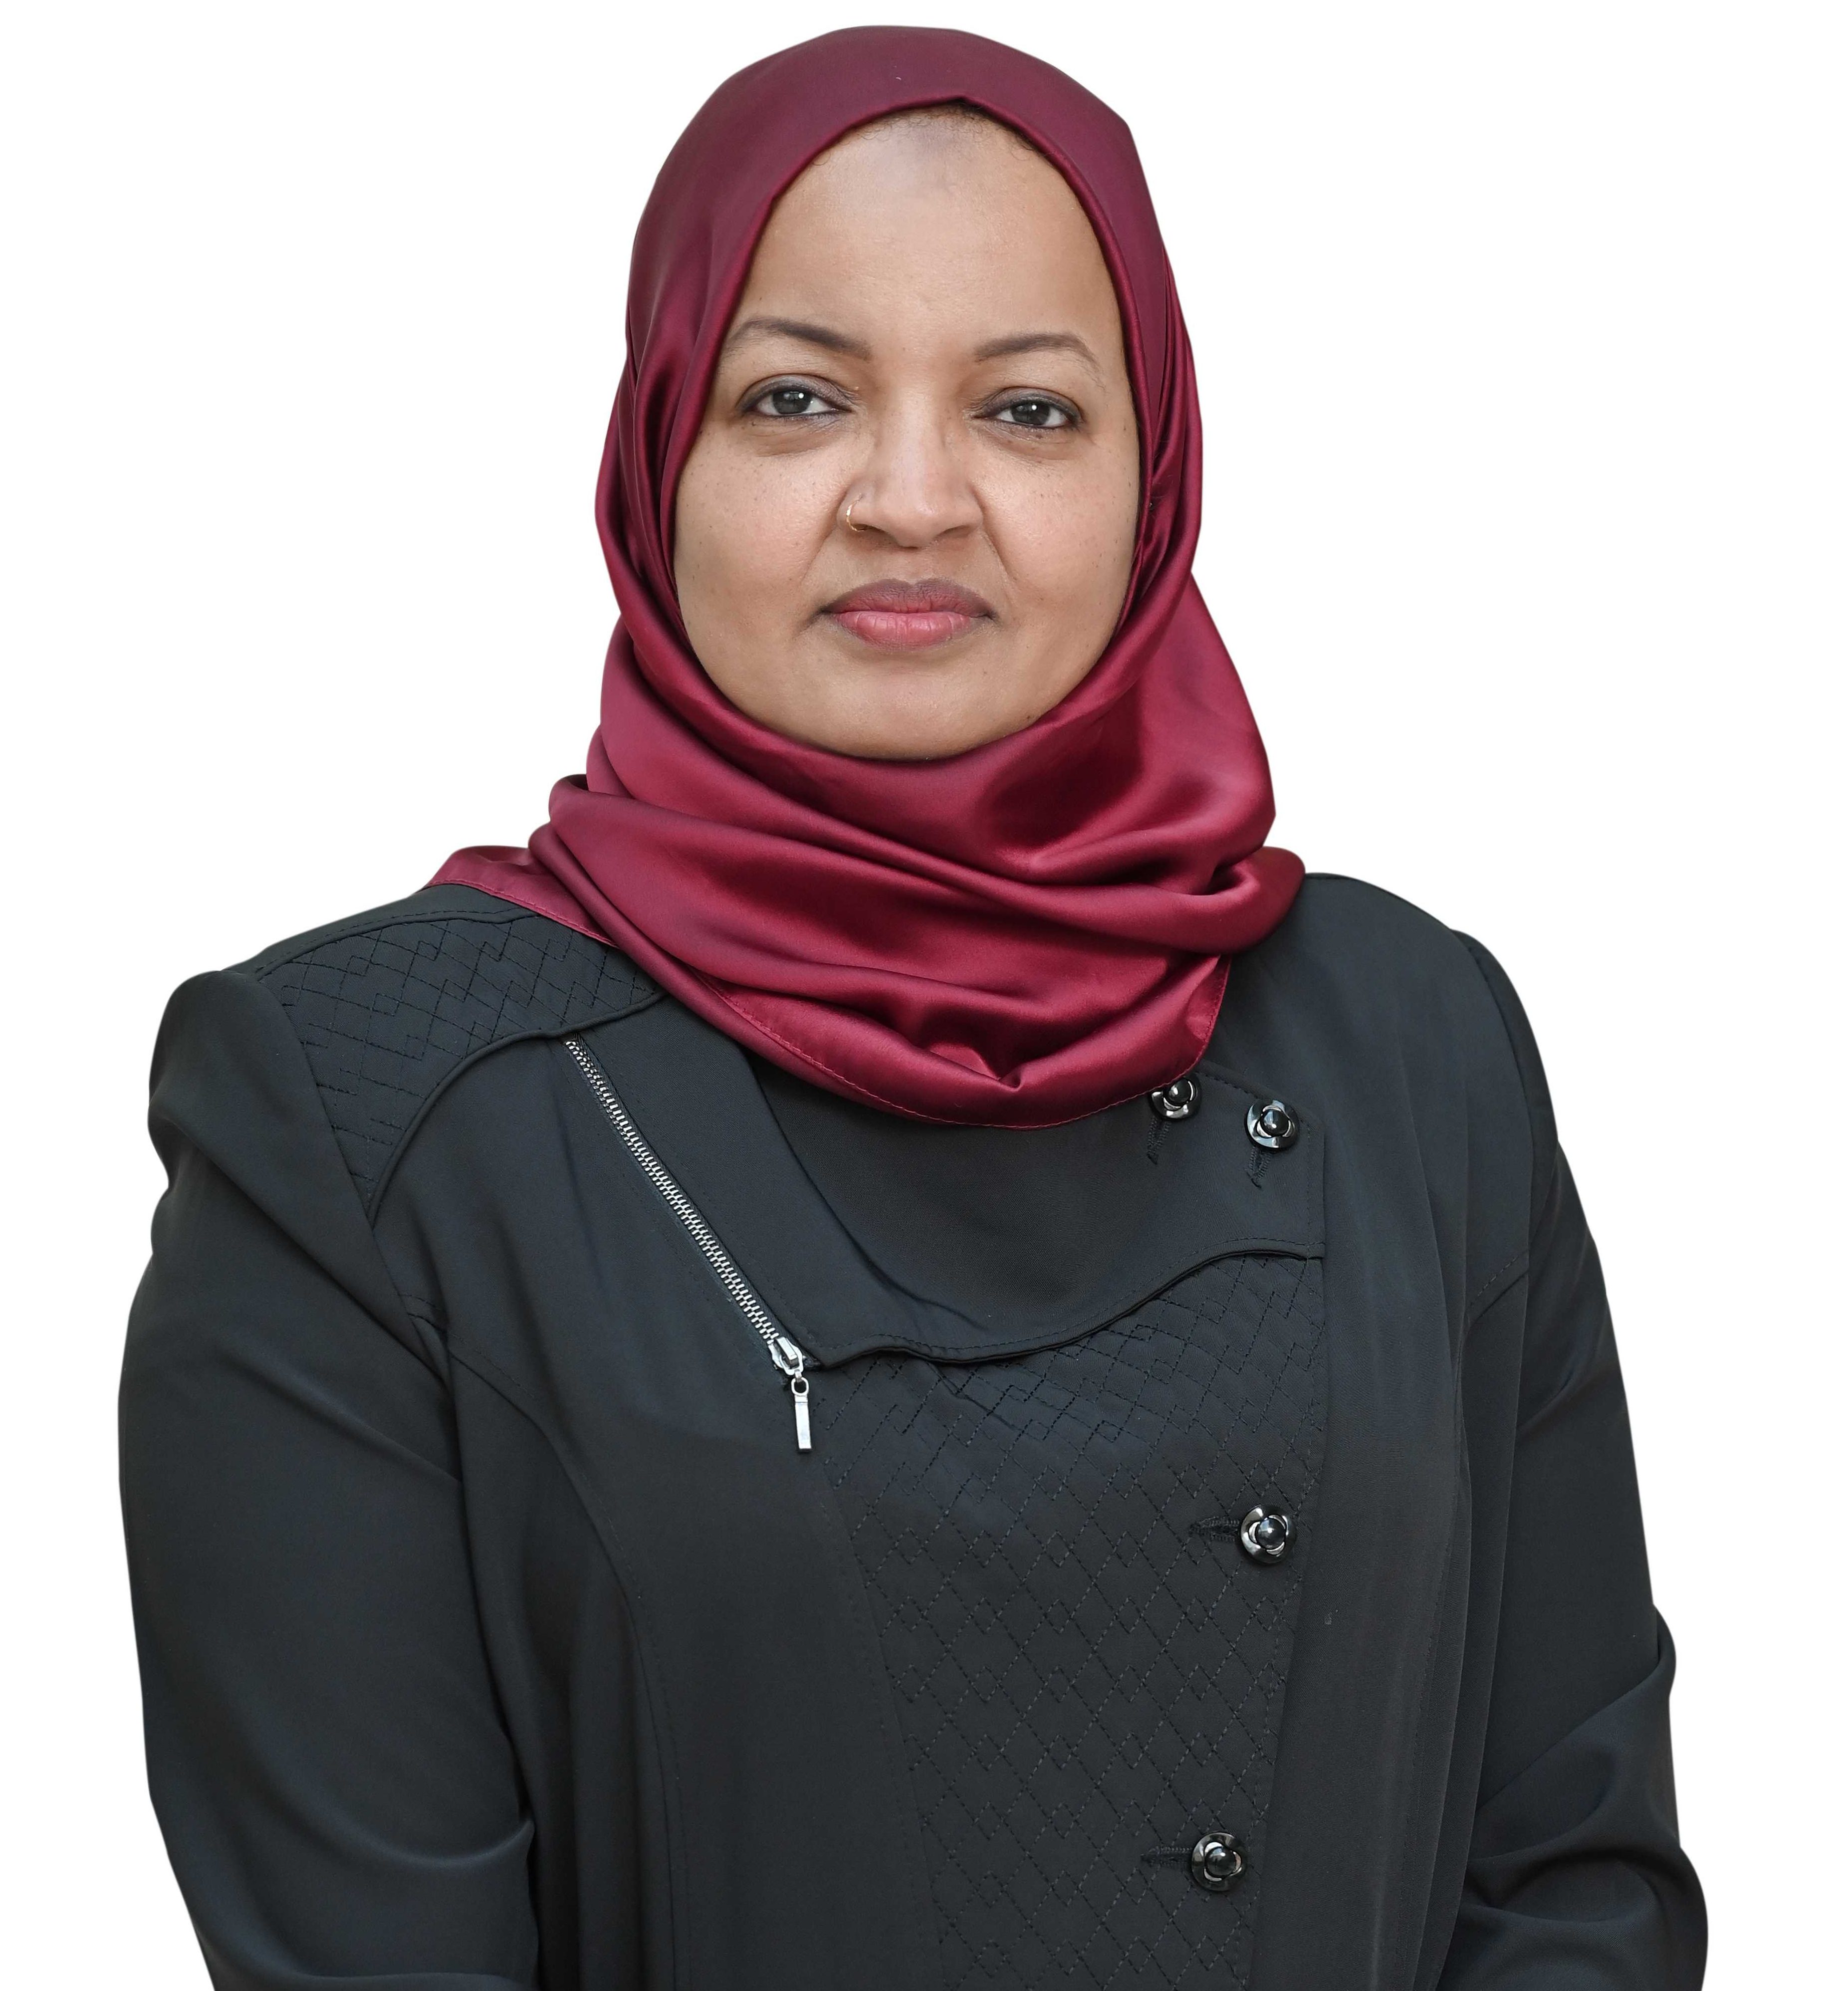 Dr. Nada Ahmed Mohamad